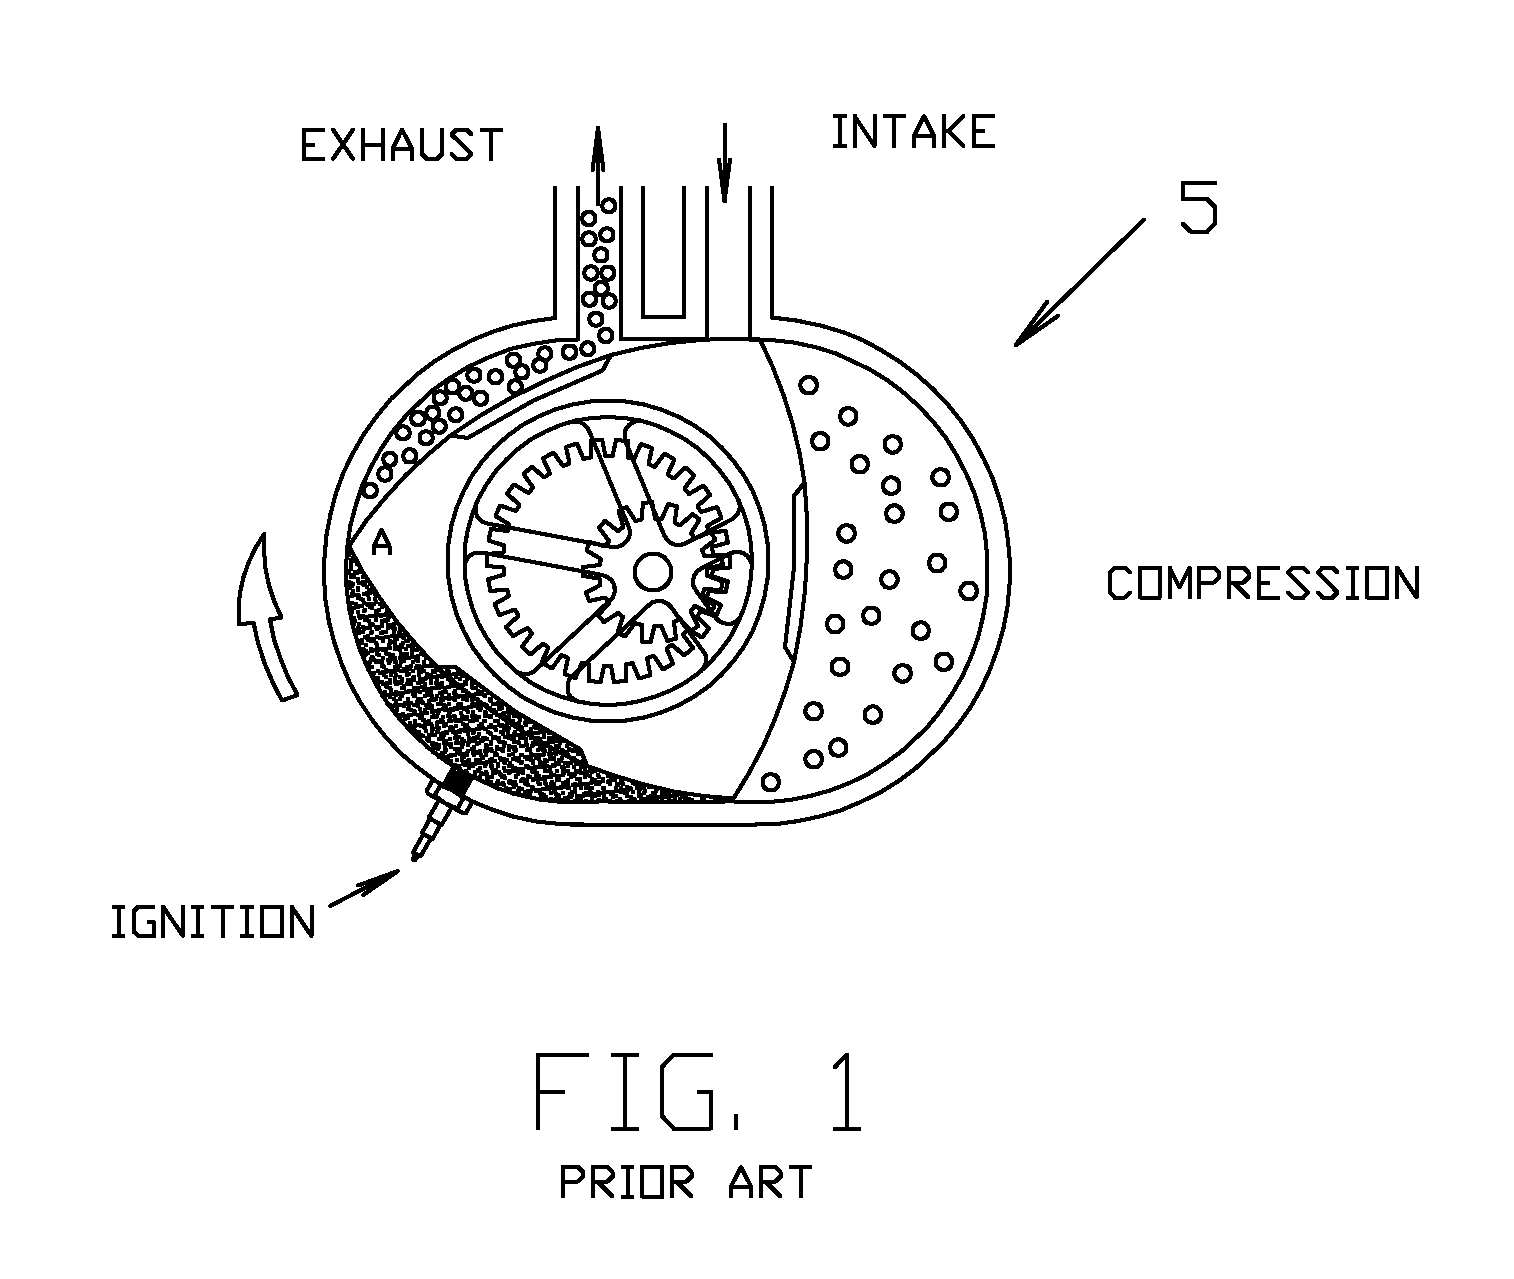 Heat engine with linear actuators